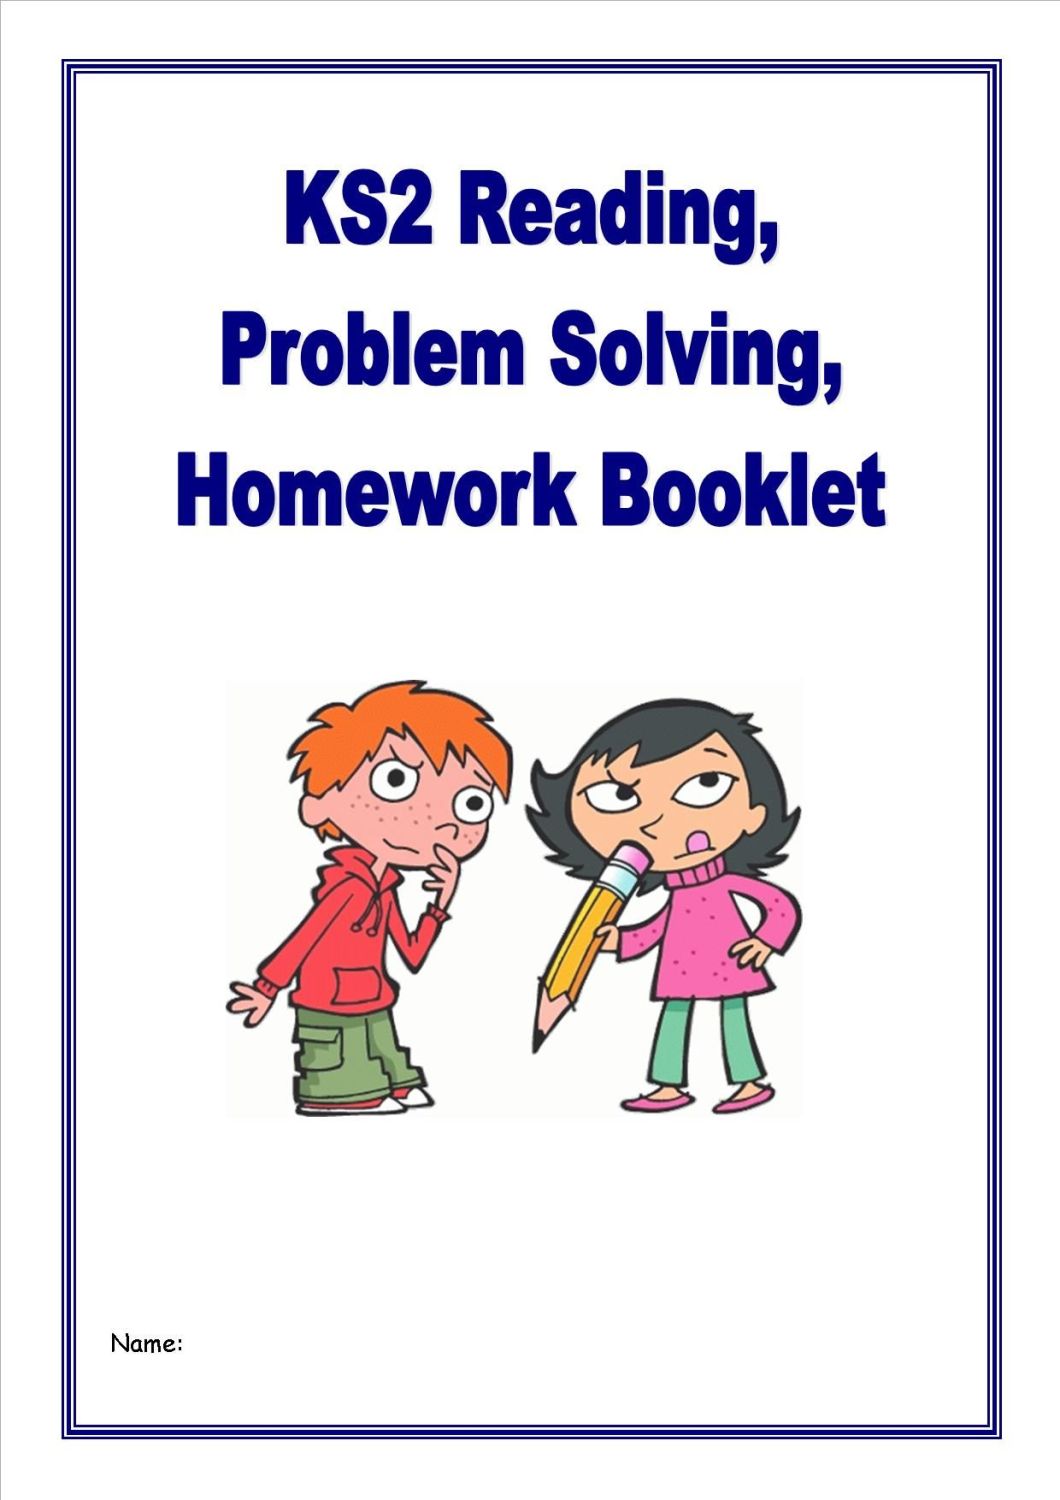 Reading Comprehension, Inference,Problem Solving/Homework Activities for KS